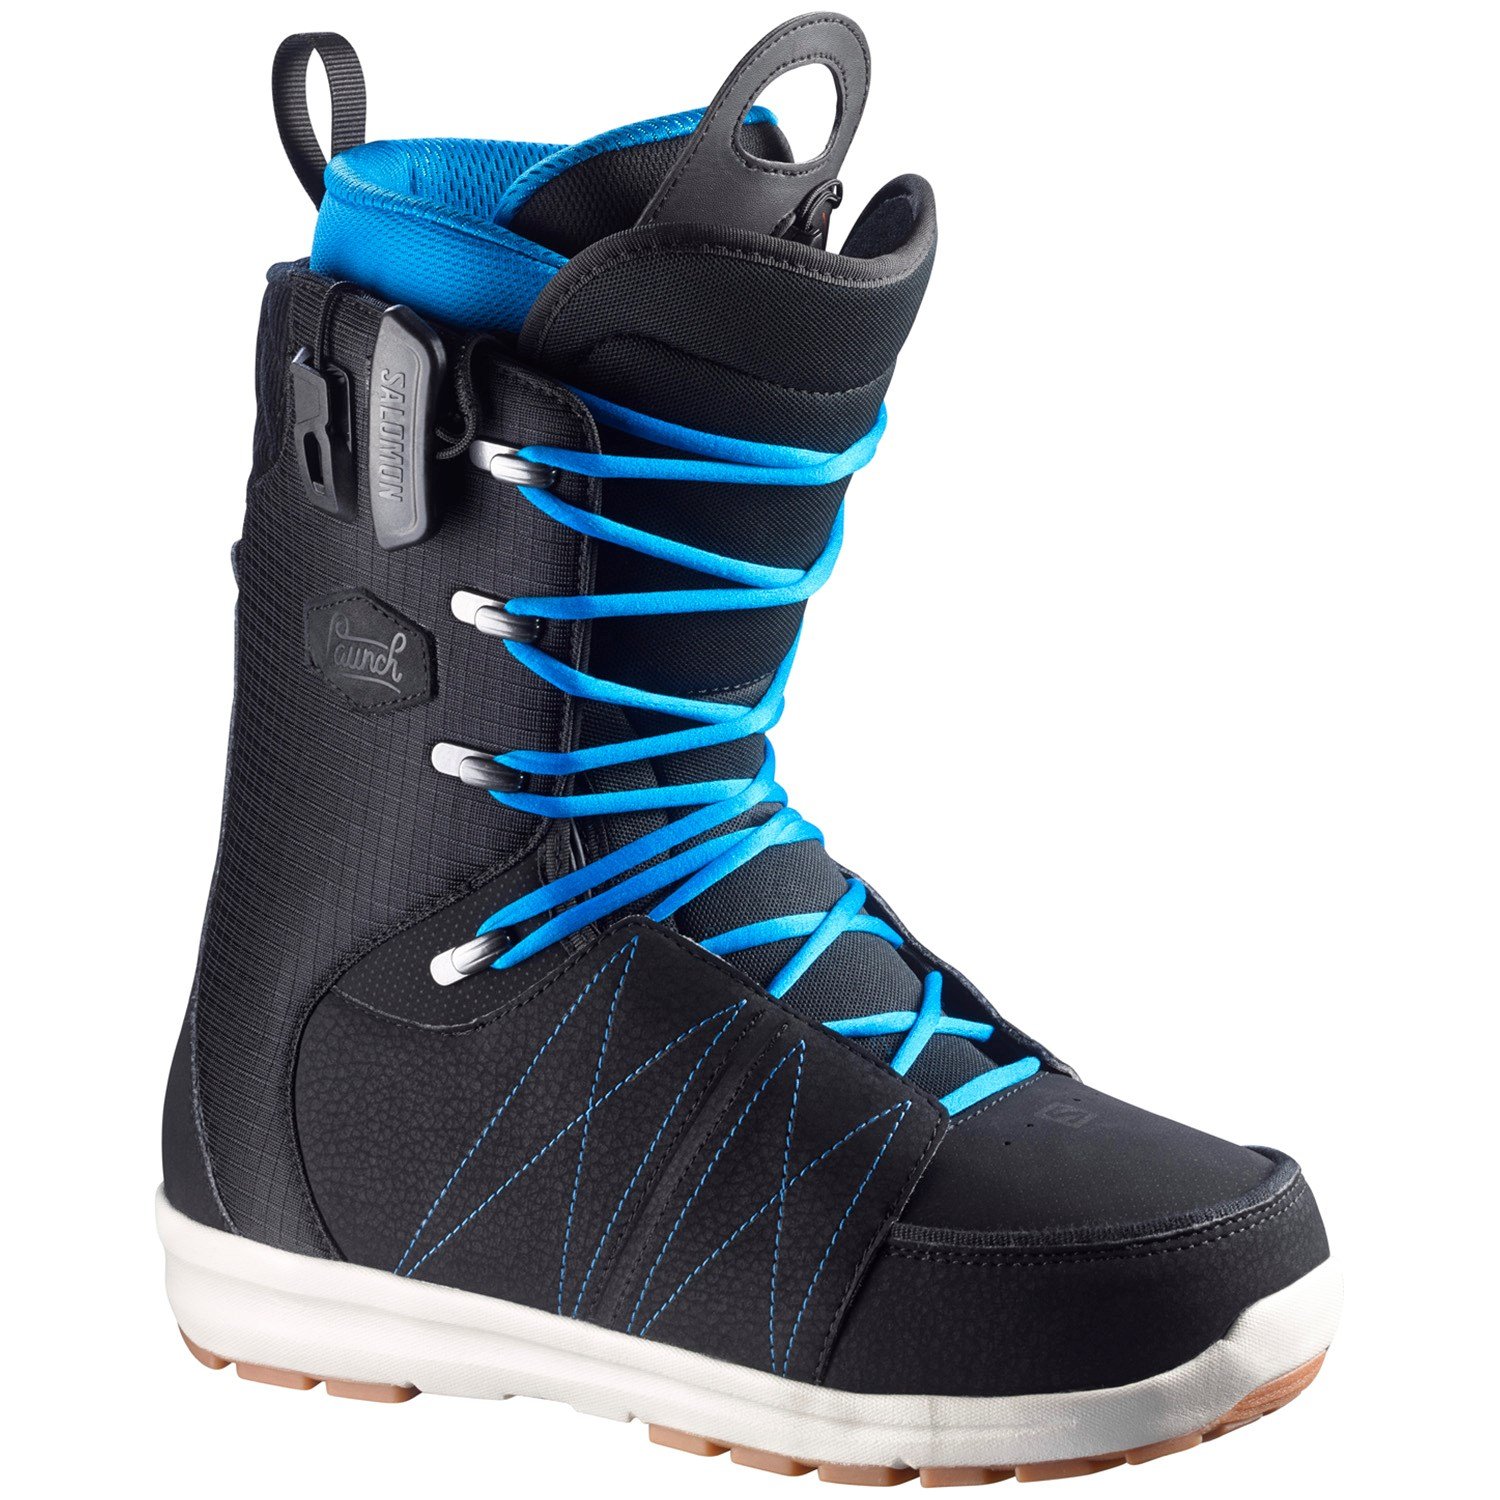 Salomon Launch Lace Sj Snowboard Boots 2016 Evo regarding The Most Incredible and also Interesting how to lace snowboard boots with regard to Cozy